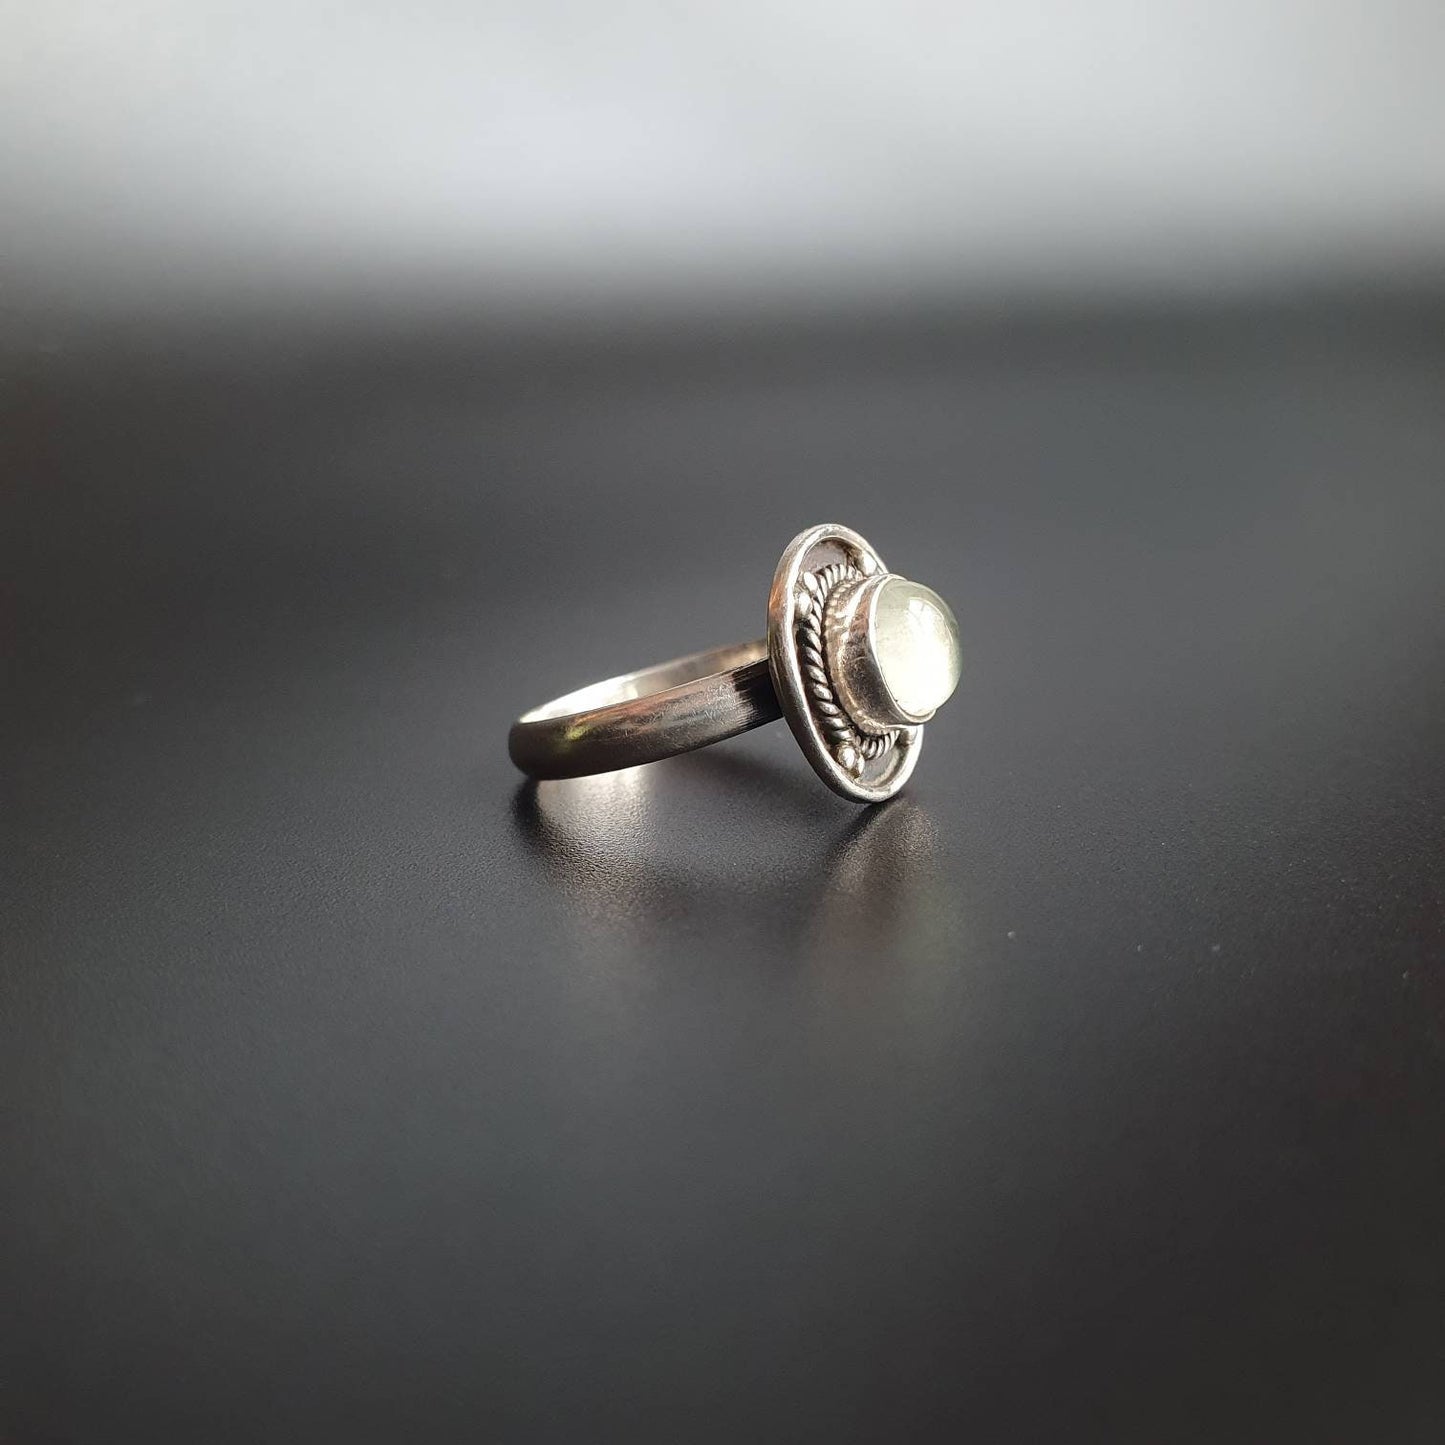 Statement ring, stackable rings, sterling silver ring, statement jewelry, gifts, dainty ring, petite Ring, small ring, unique jewelry